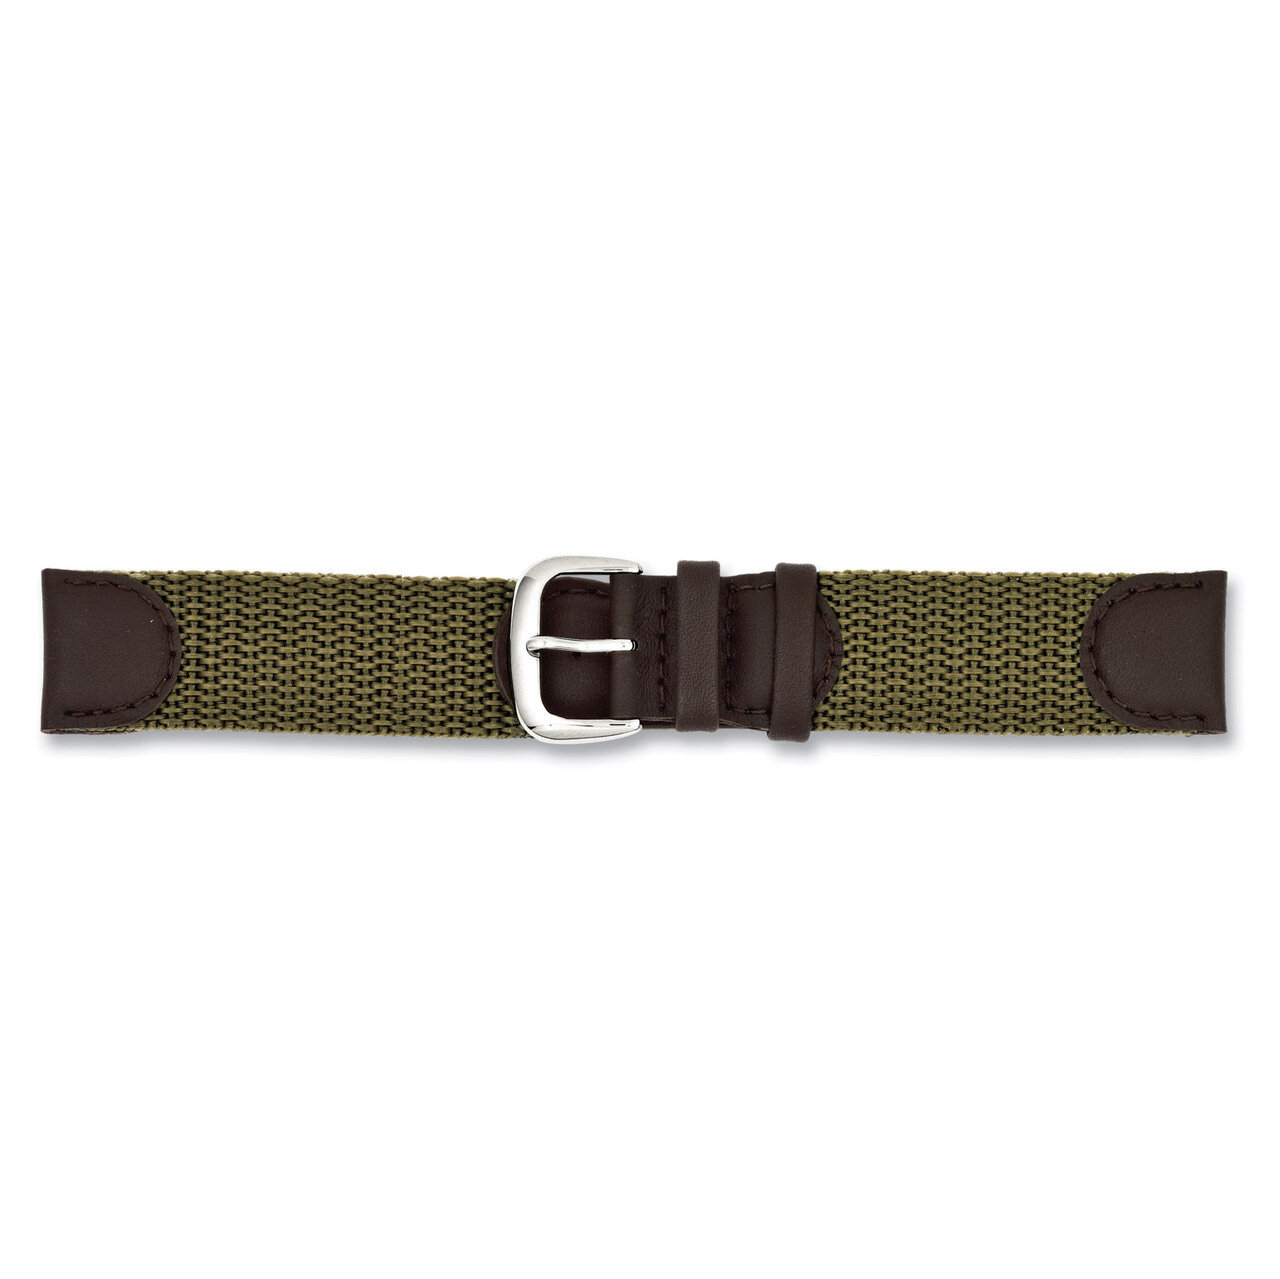 19mm Olive Army Style Nylon Leather Watch Band 7.5 Inch Silver-tone Buckle BA301-19